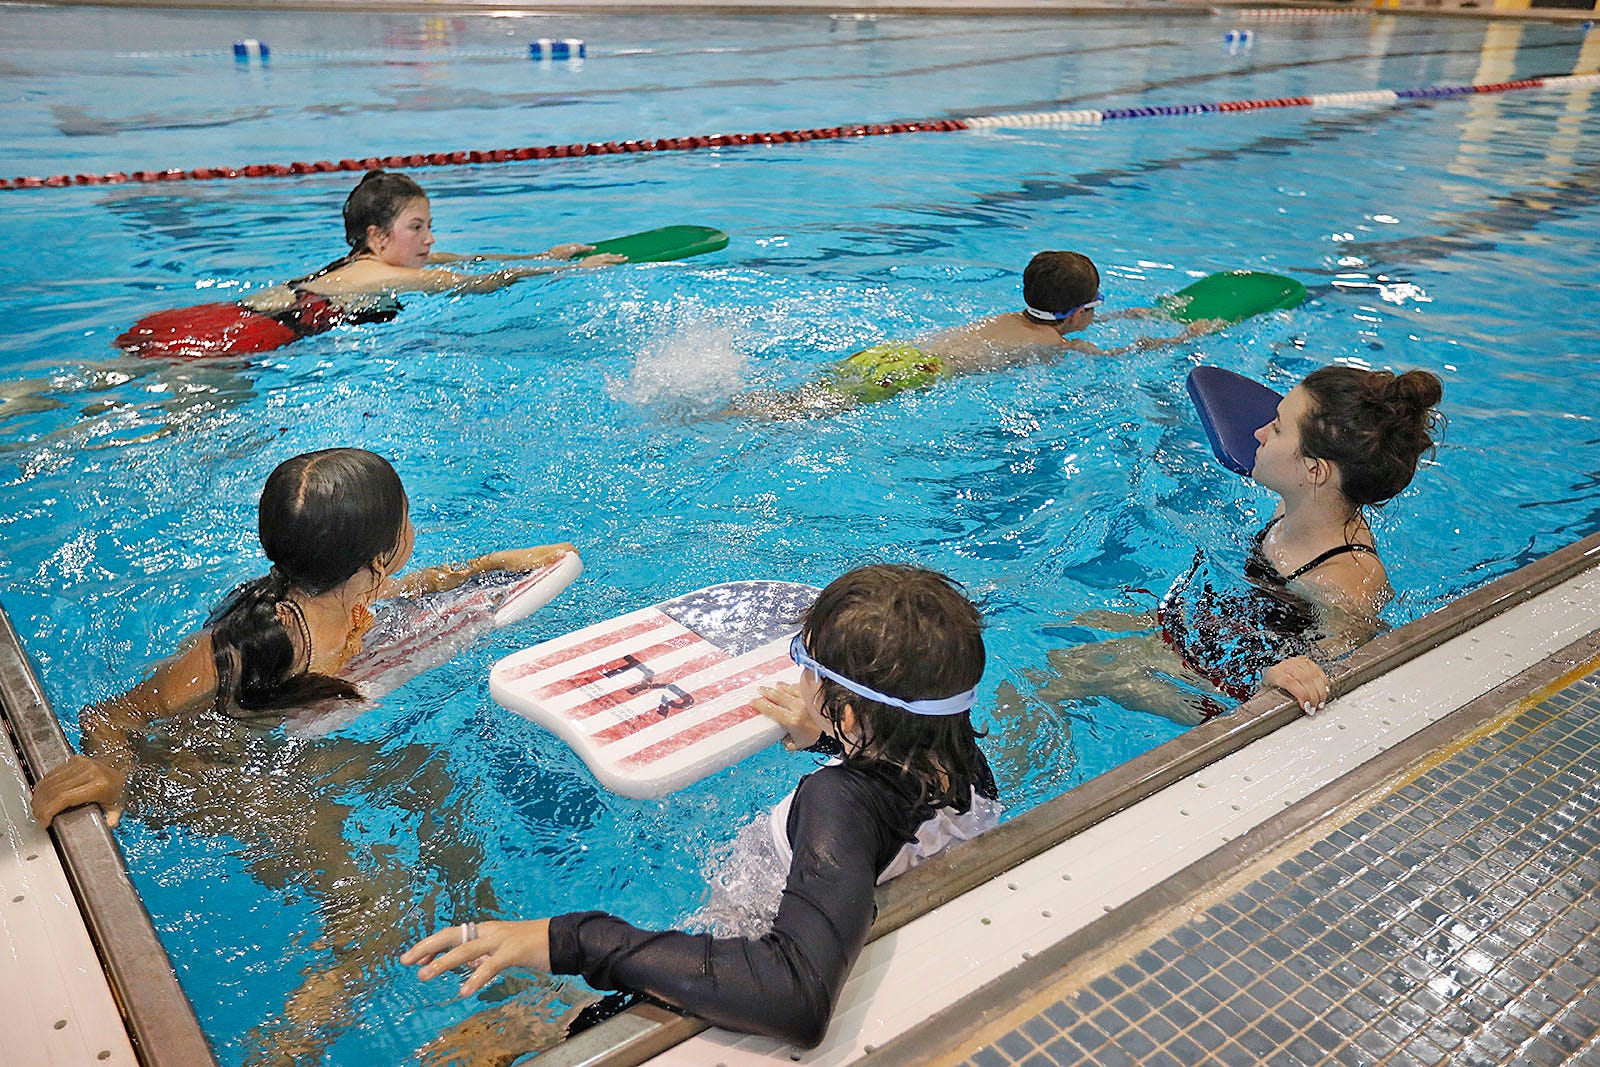 Swimming instructor demonstrating with kickboard